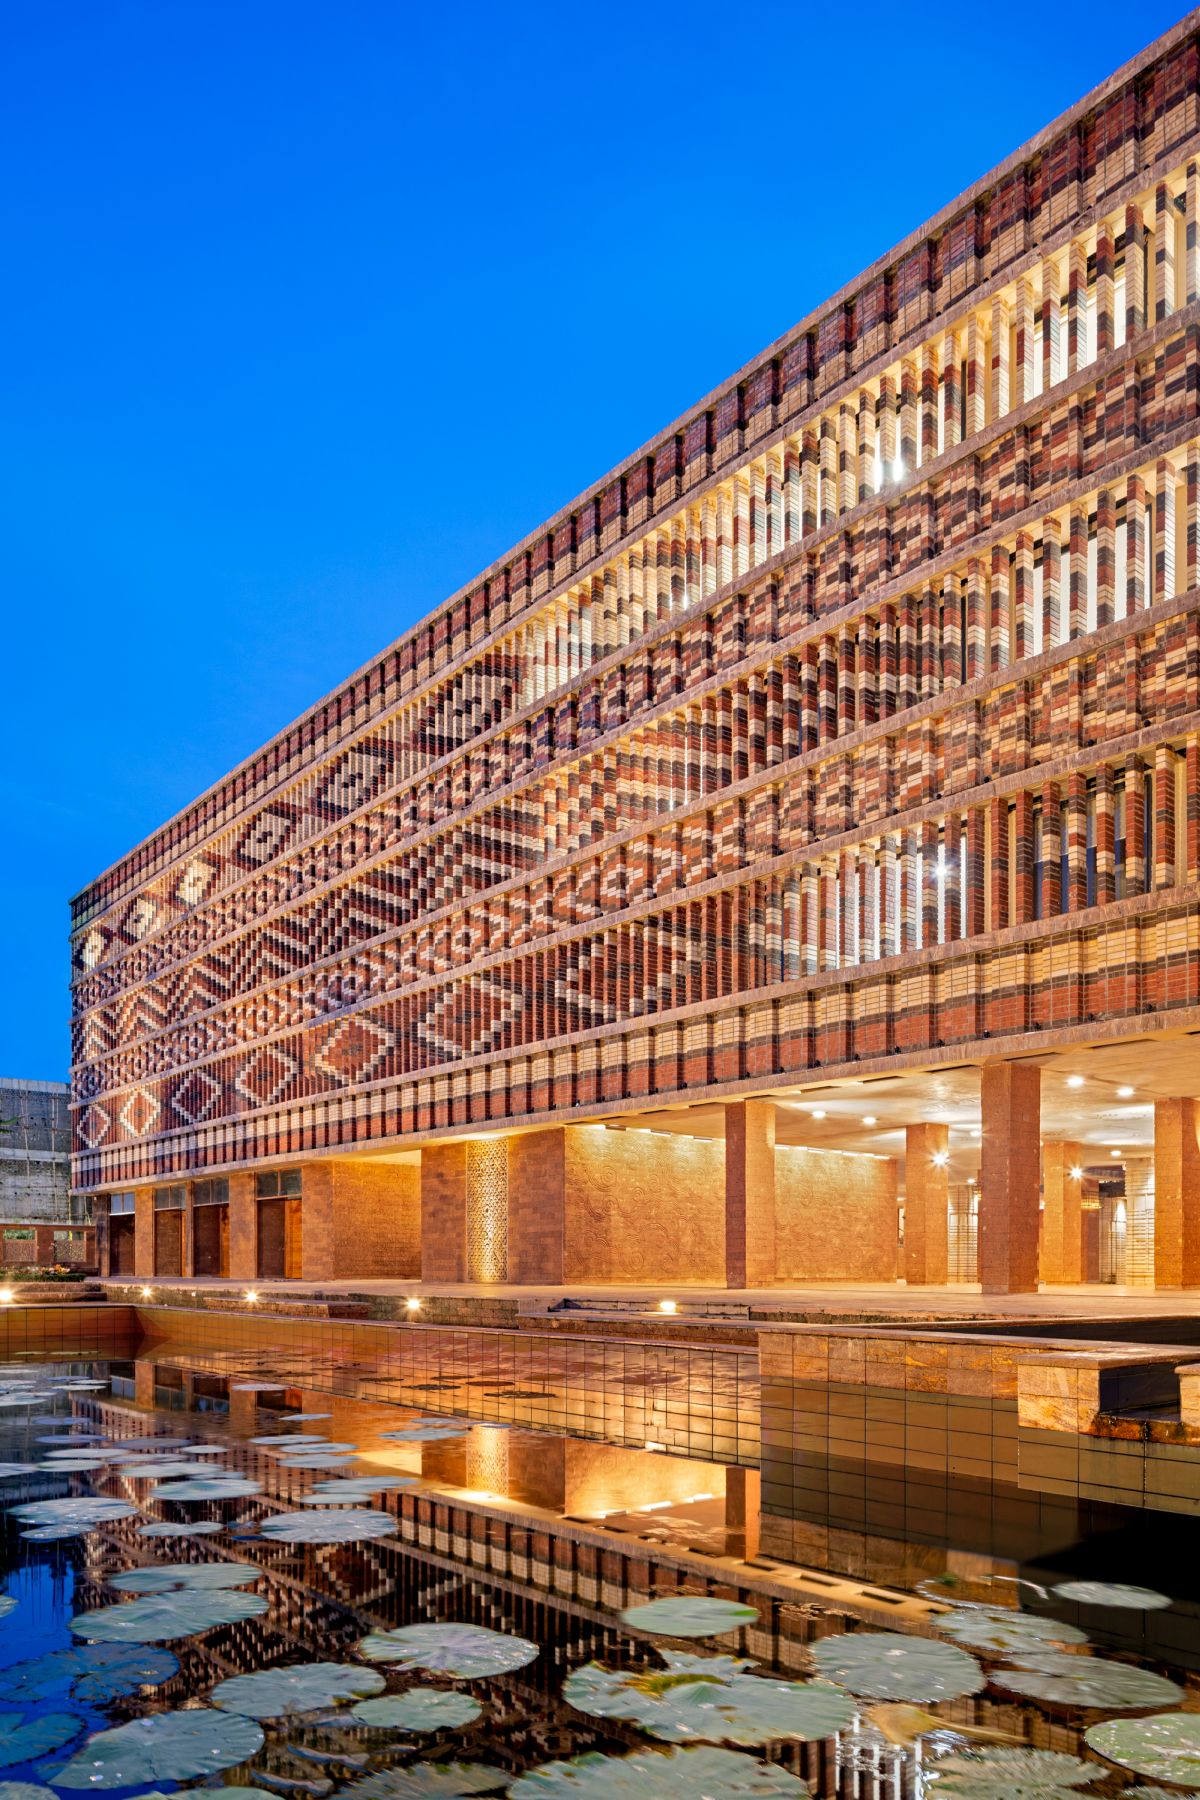 Krushi Bhawan | 150 Local Artisans Come Together to Craft a Civic Building in India, by Studio Lotus 38